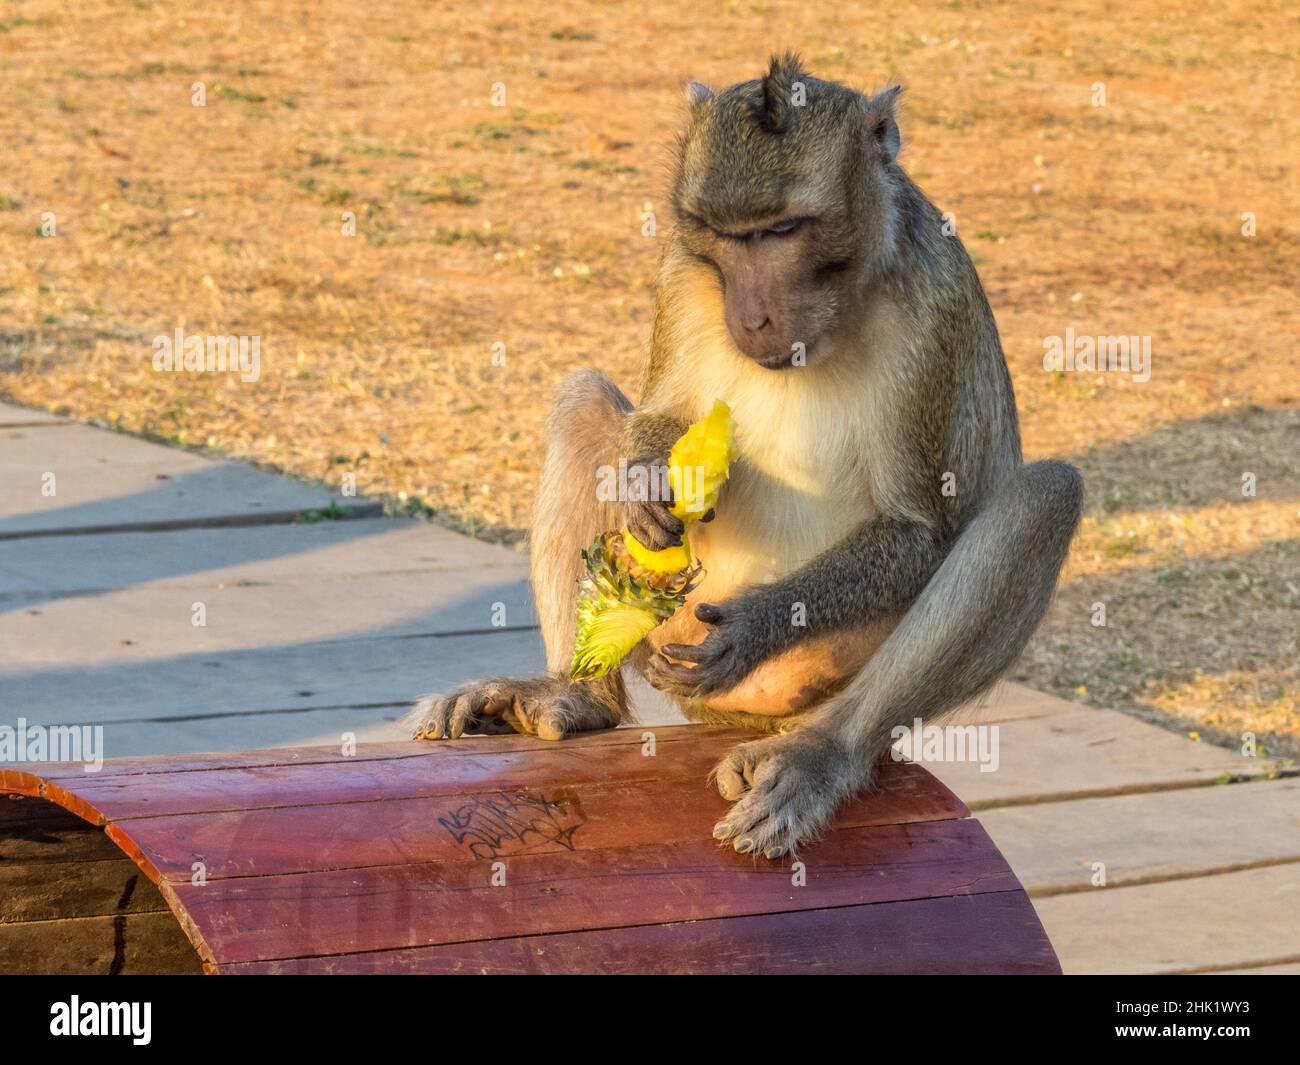 A macaque monkey with his loot at the West Gate of Angkor Wat - Siem Reap, Cambodia Stock Photo